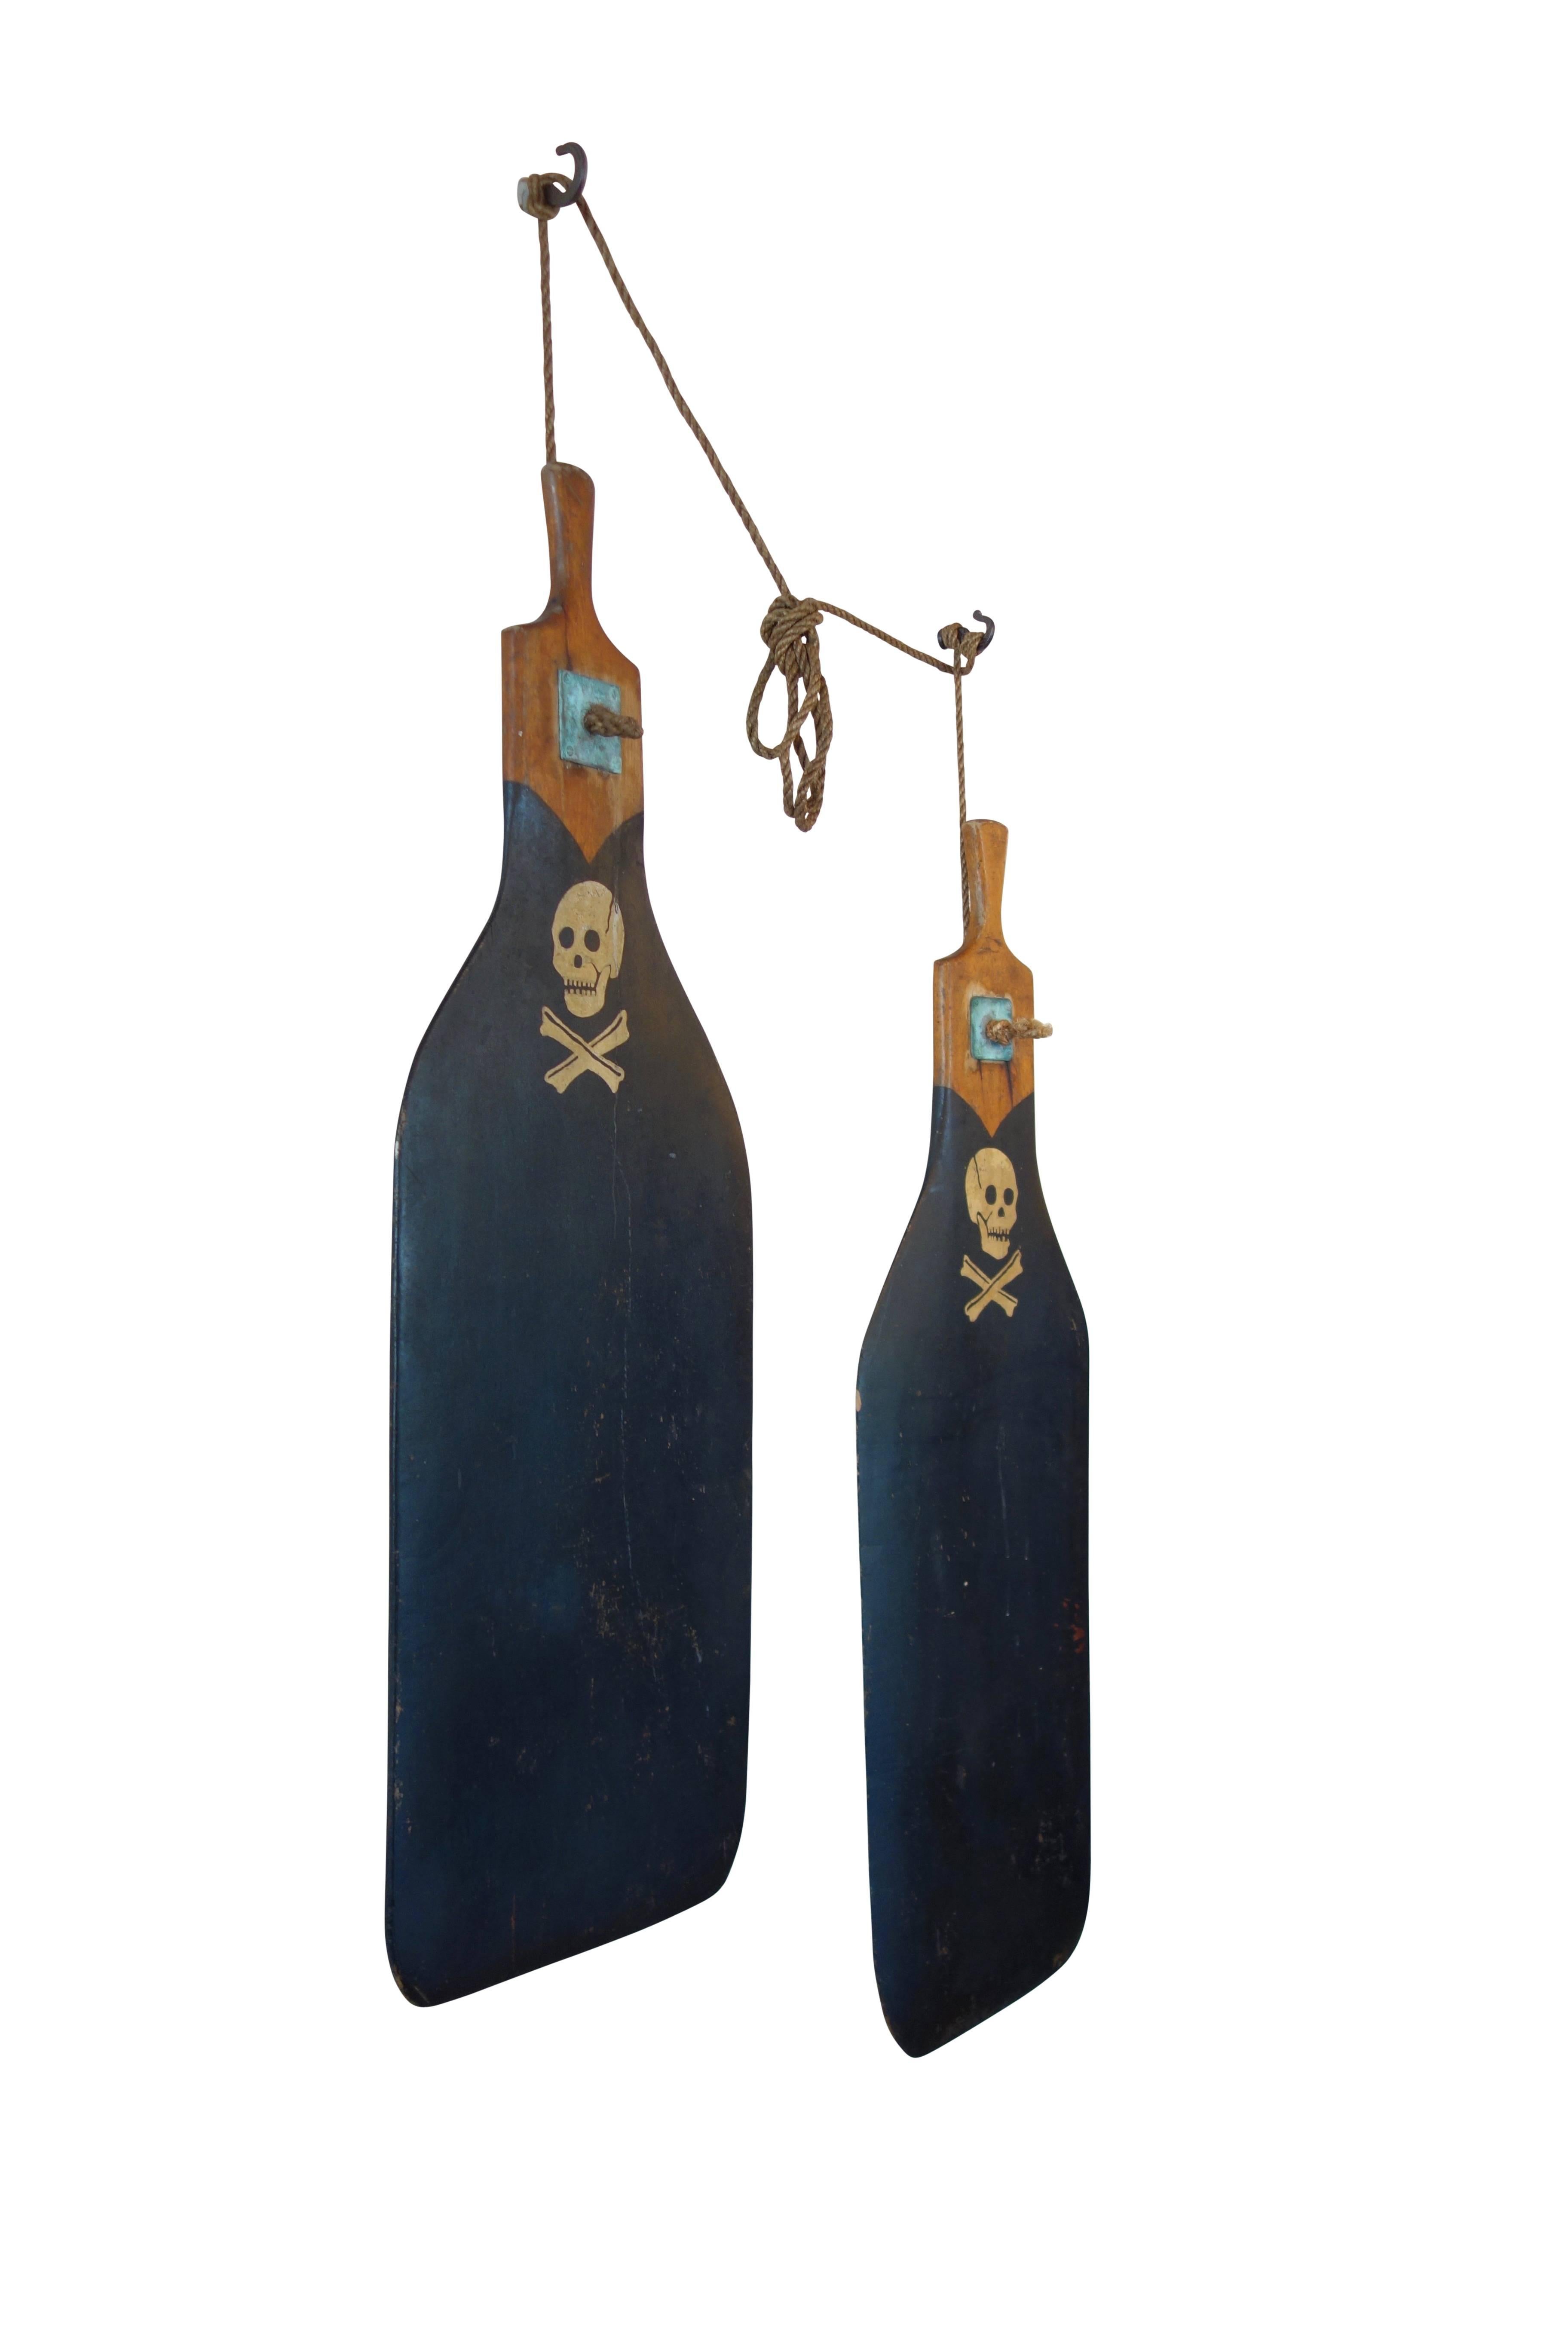 Folk Art Pair of Boat Rudders with Hand-Painted Skull and Crossbones, circa 1930